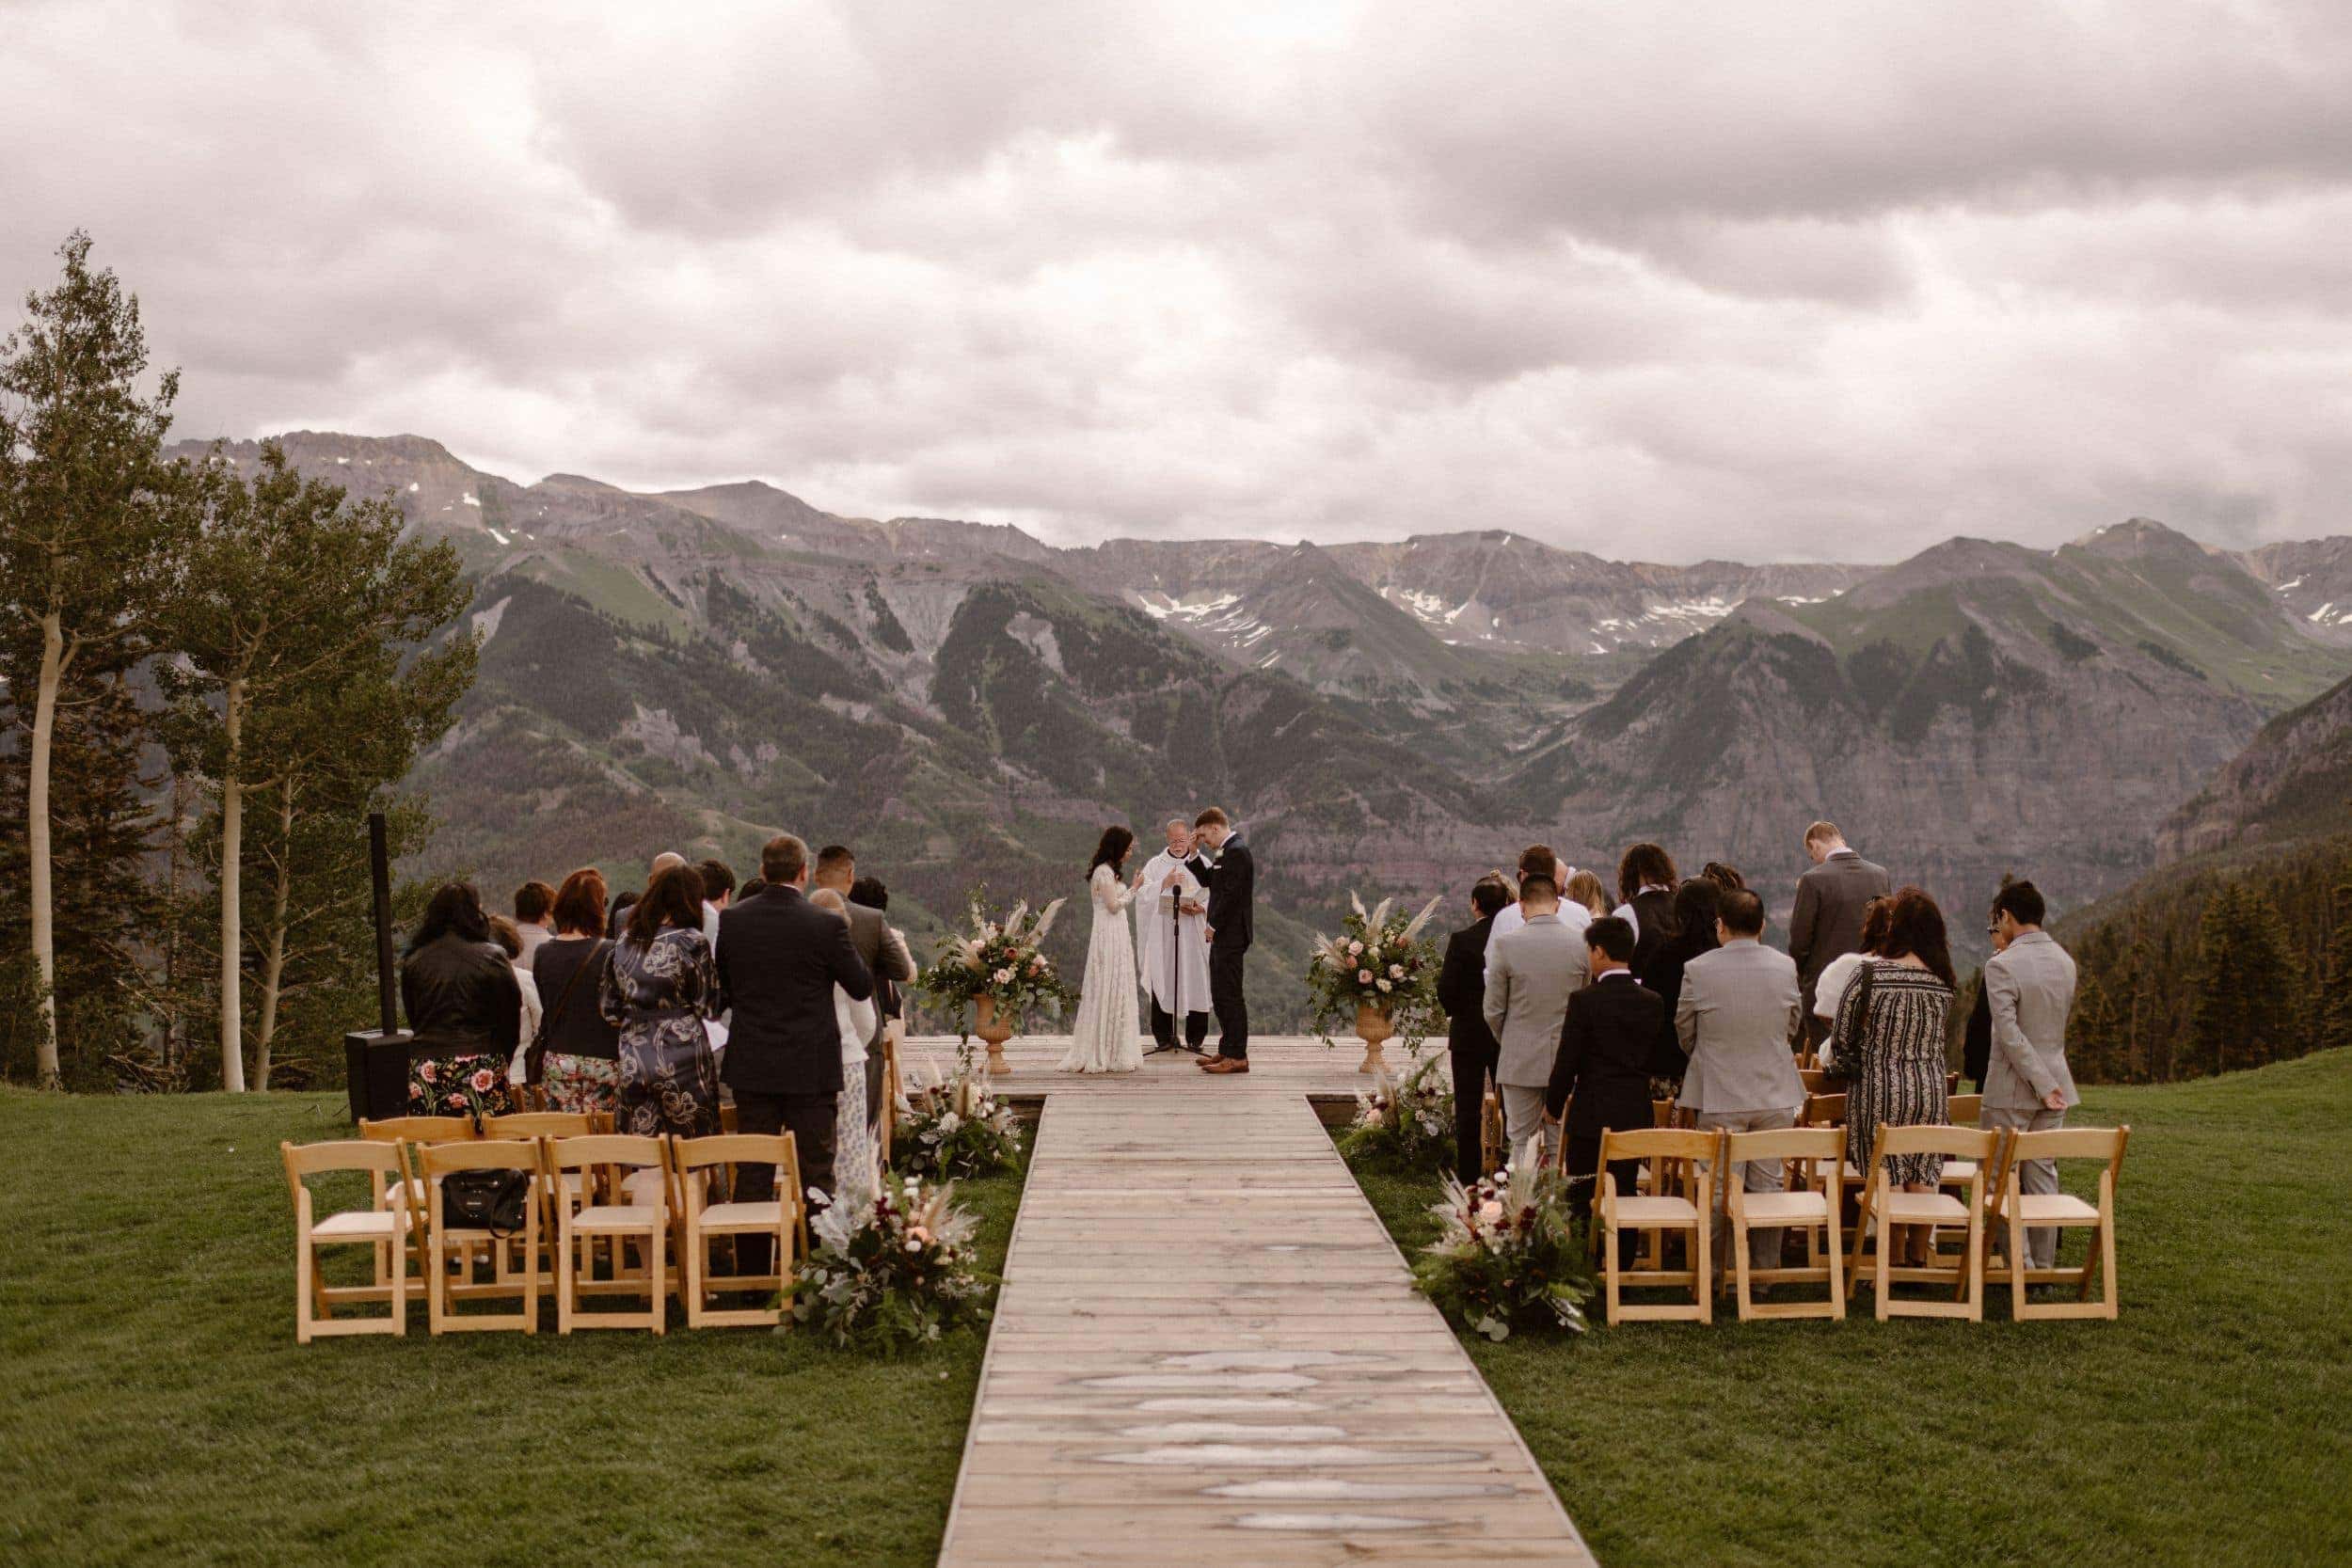 How to Plan an Intimate Wedding | Adventure Instead